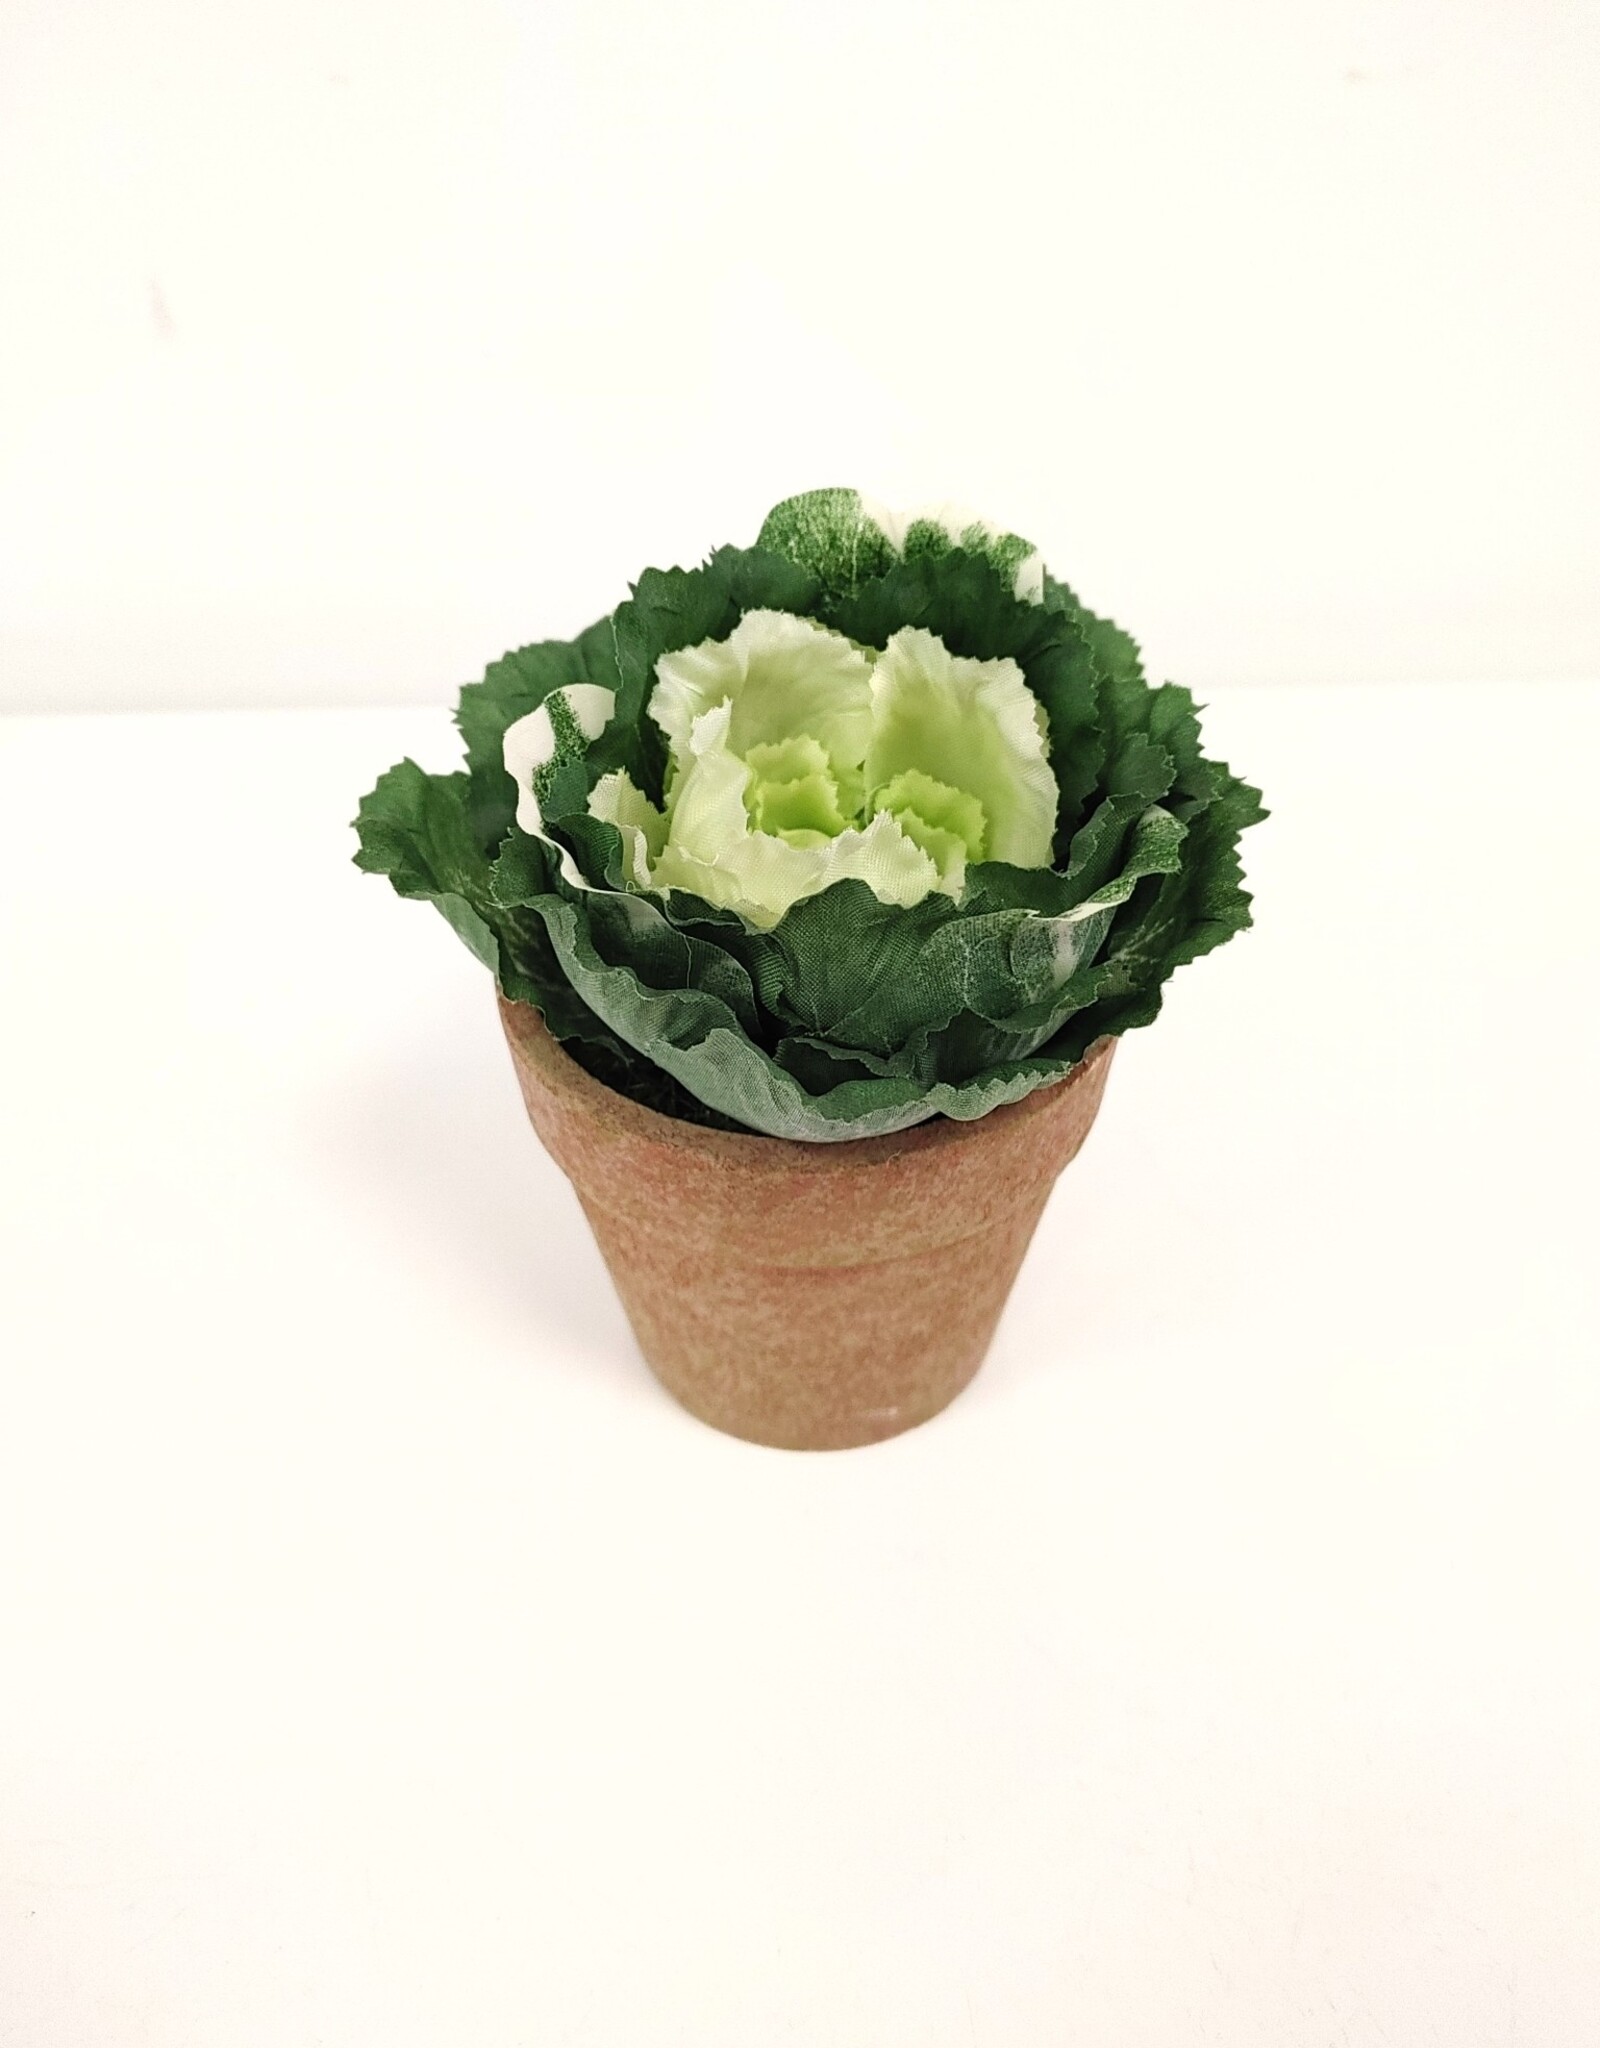 Small Artificial Potted Cabbage